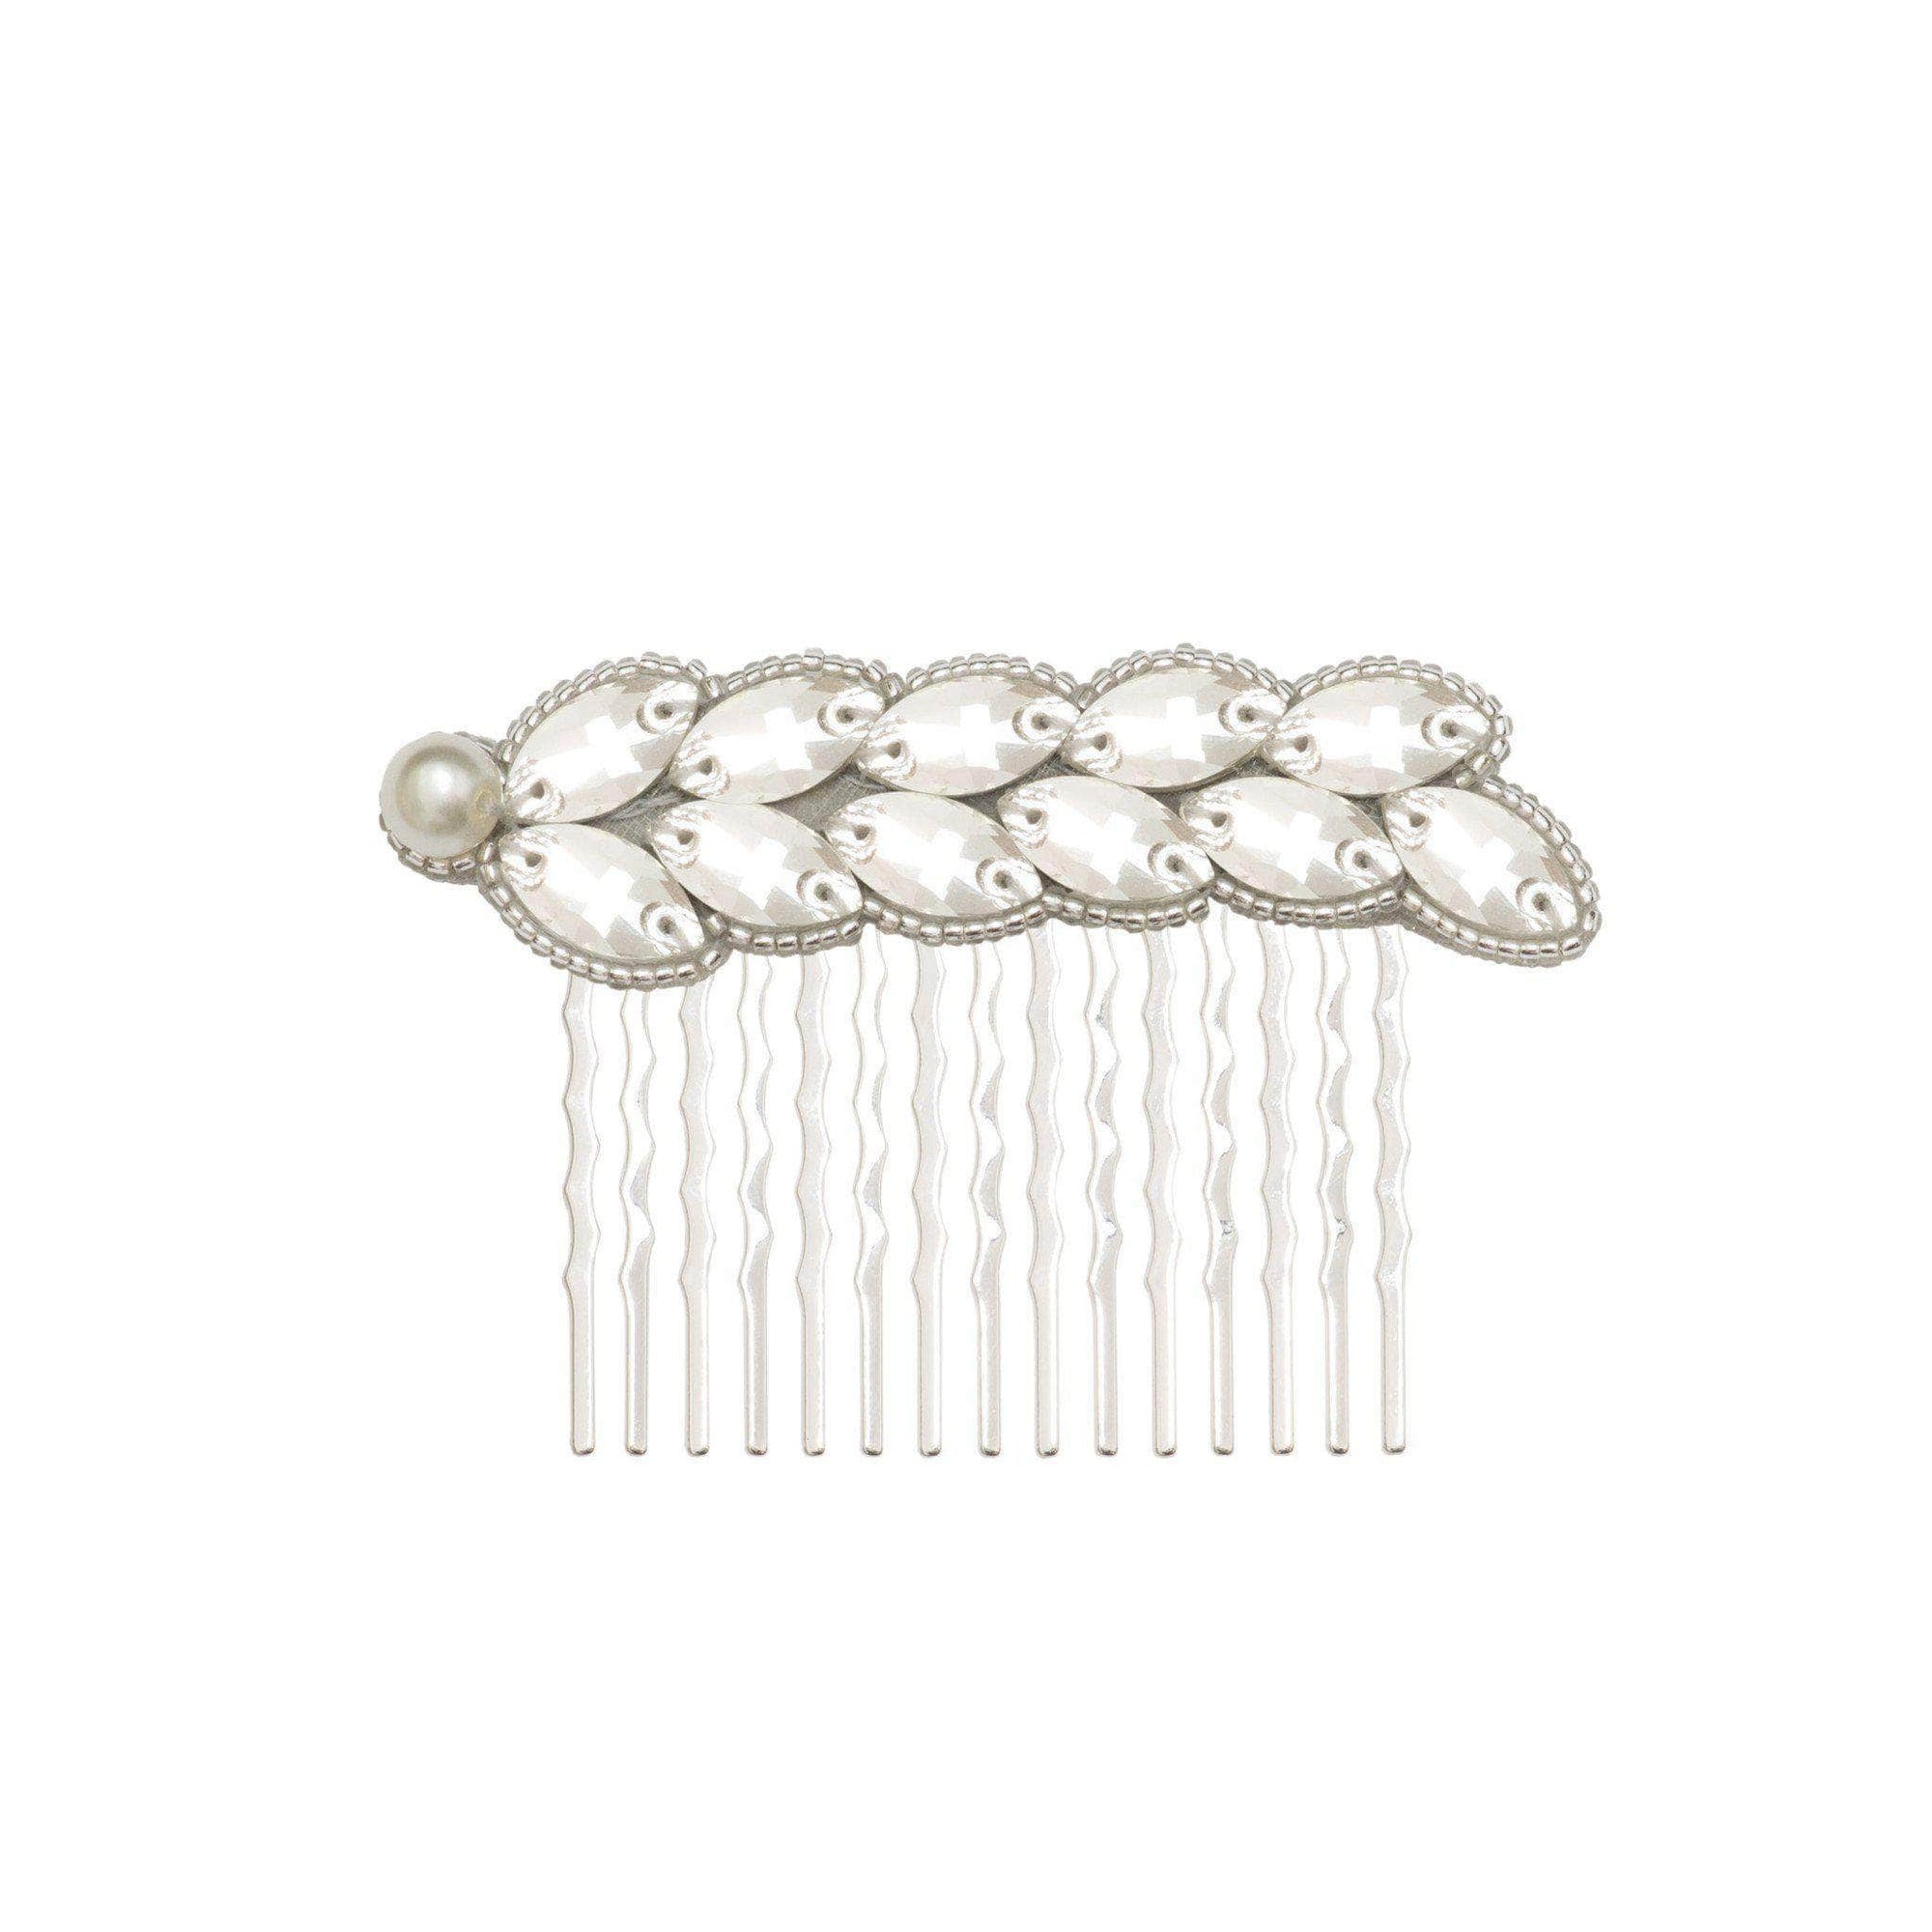 Wedding Haircomb Silver Sale - Bridal hair comb with a leaf style arrangement of crystals - 'Zara'